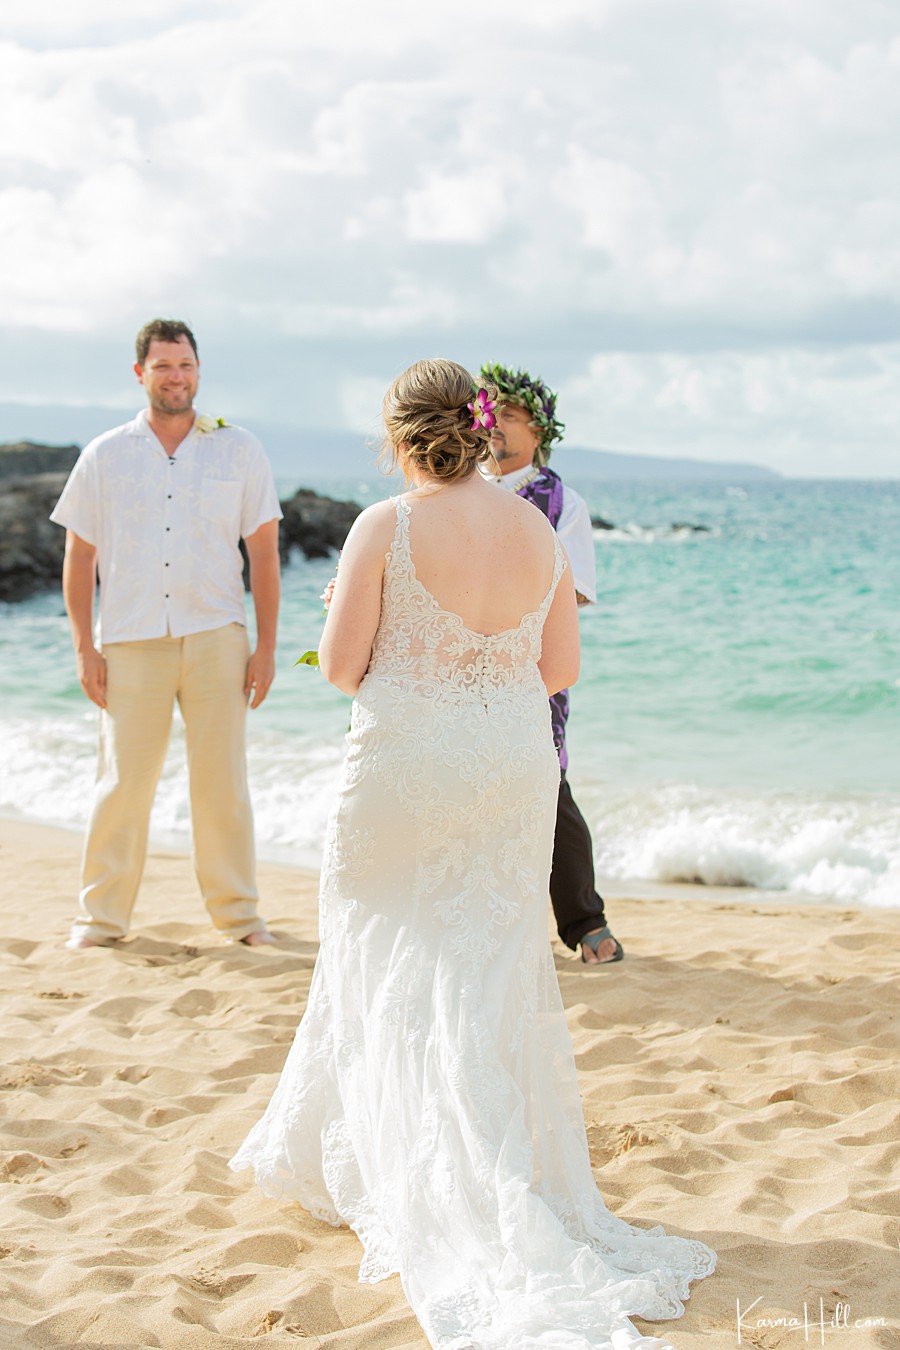 groom sees bride for the first time during beach wedding 